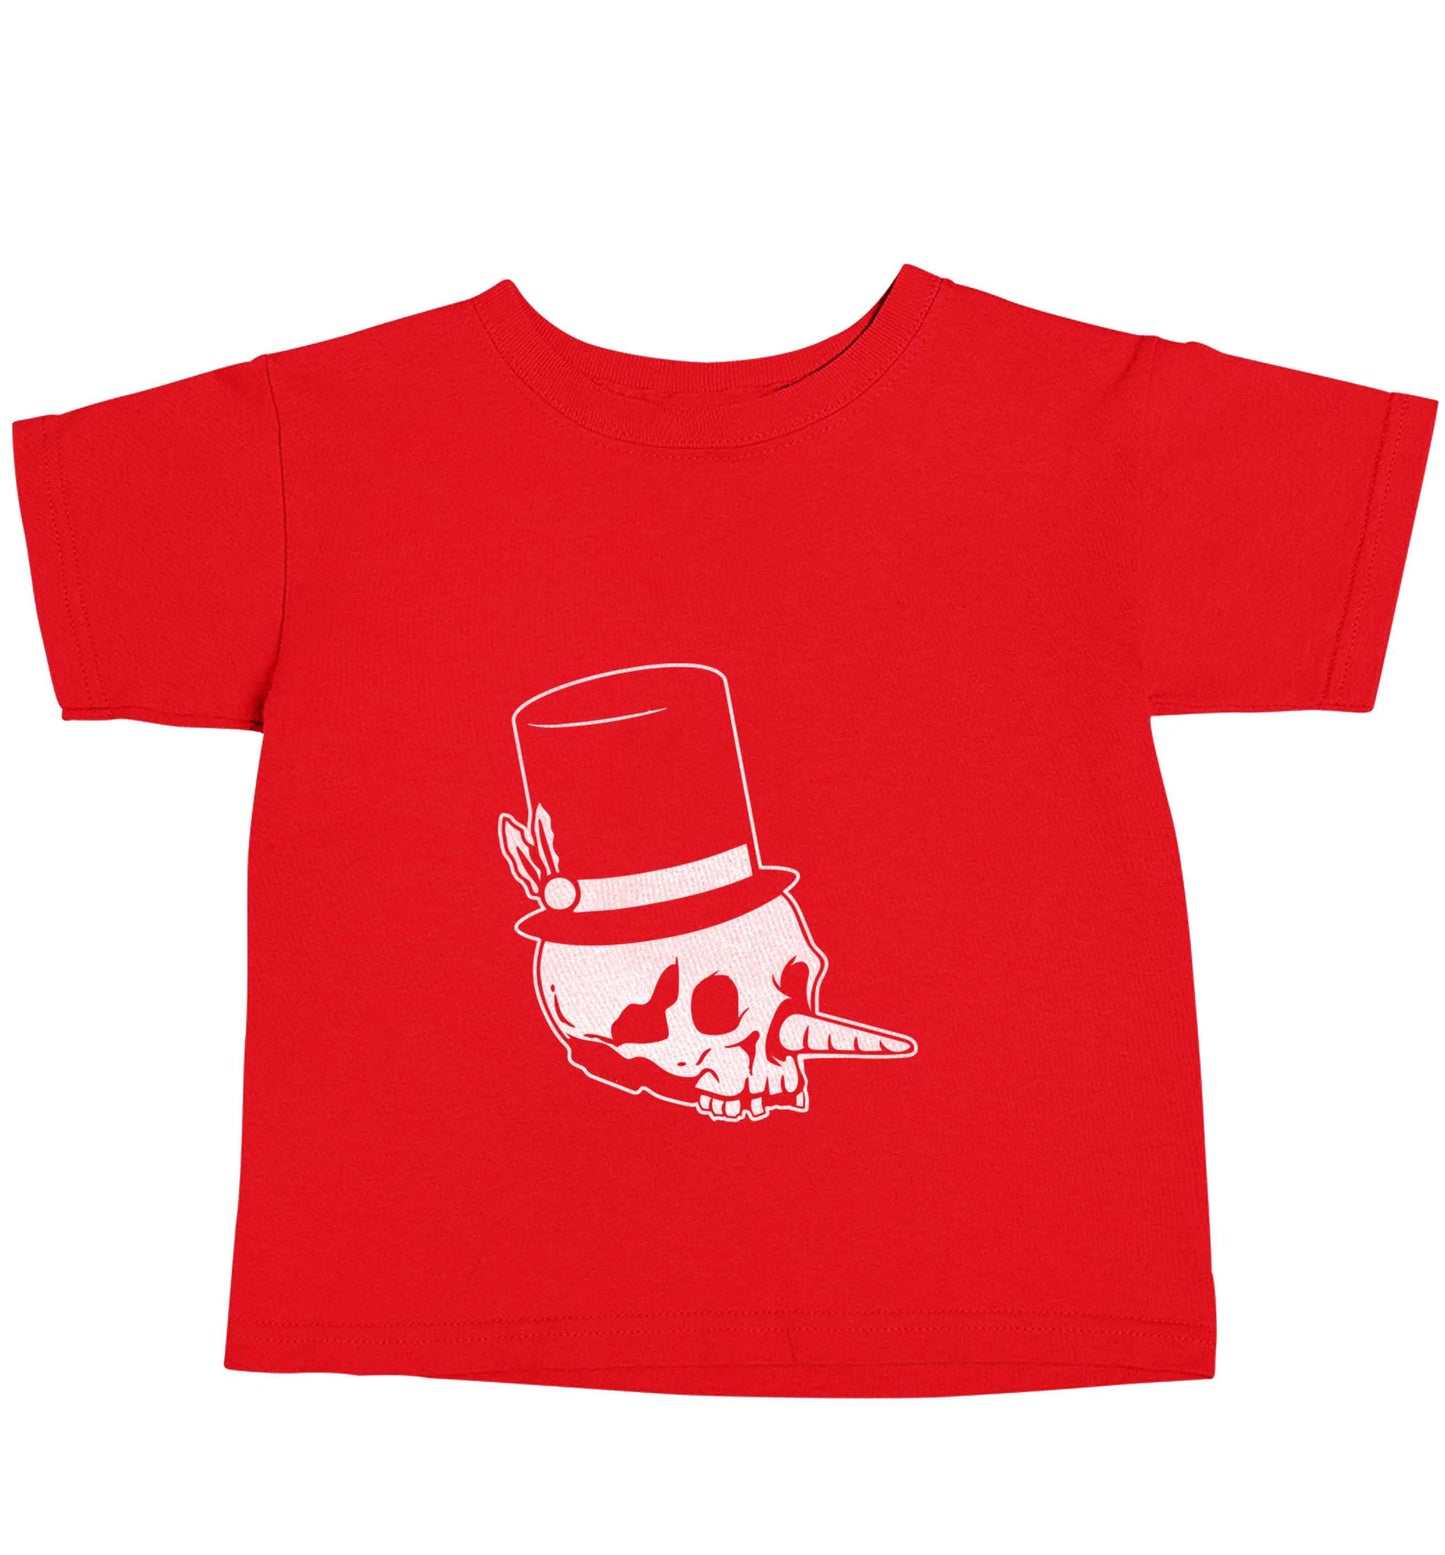 Snowman punk red baby toddler Tshirt 2 Years